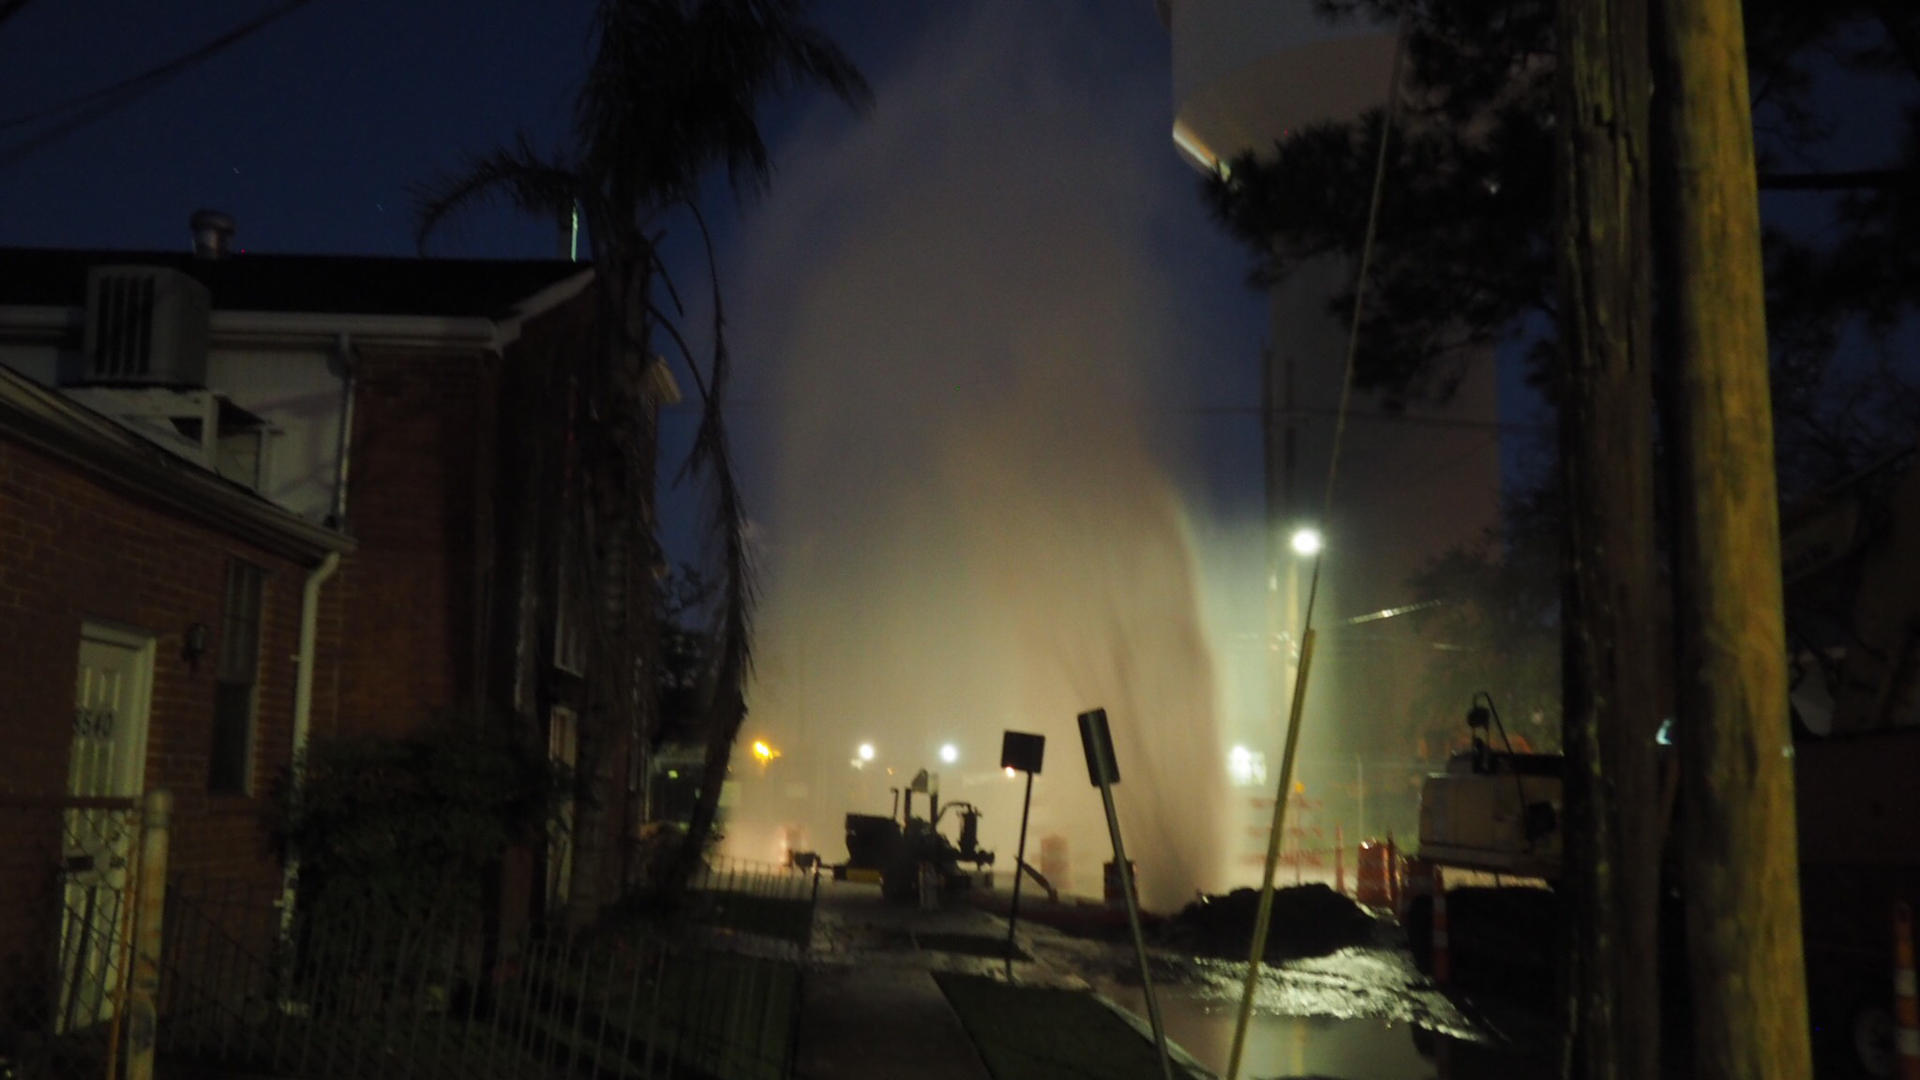 A spokesperson for the Sewerage & Water Board said the water main broke around 6:20 a.m. near the intersection of Panola and Leonidas streets.